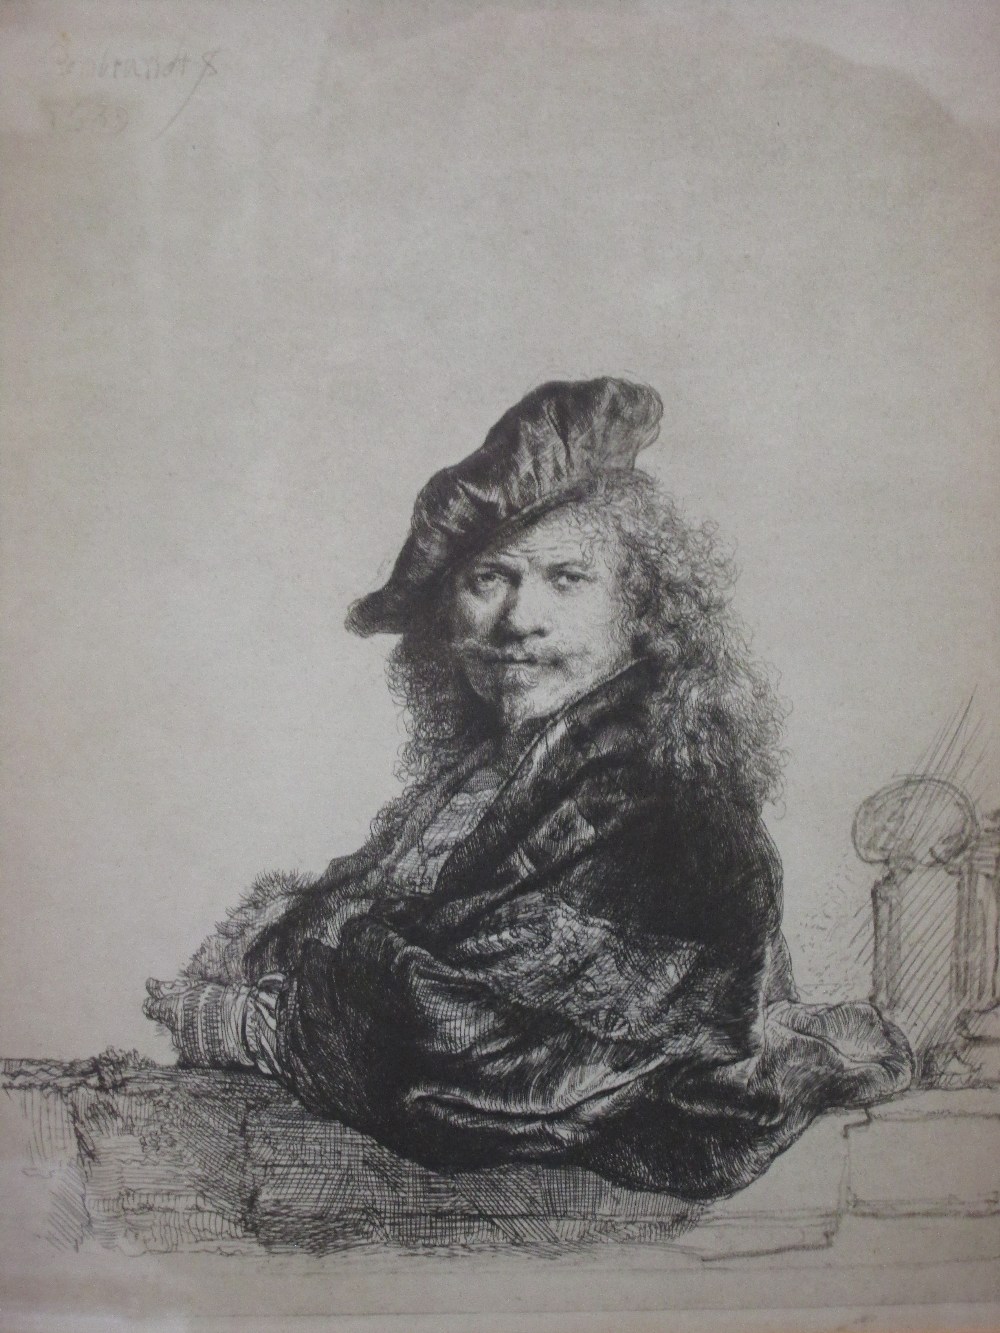 An etching after Rembrandt, early 20th century